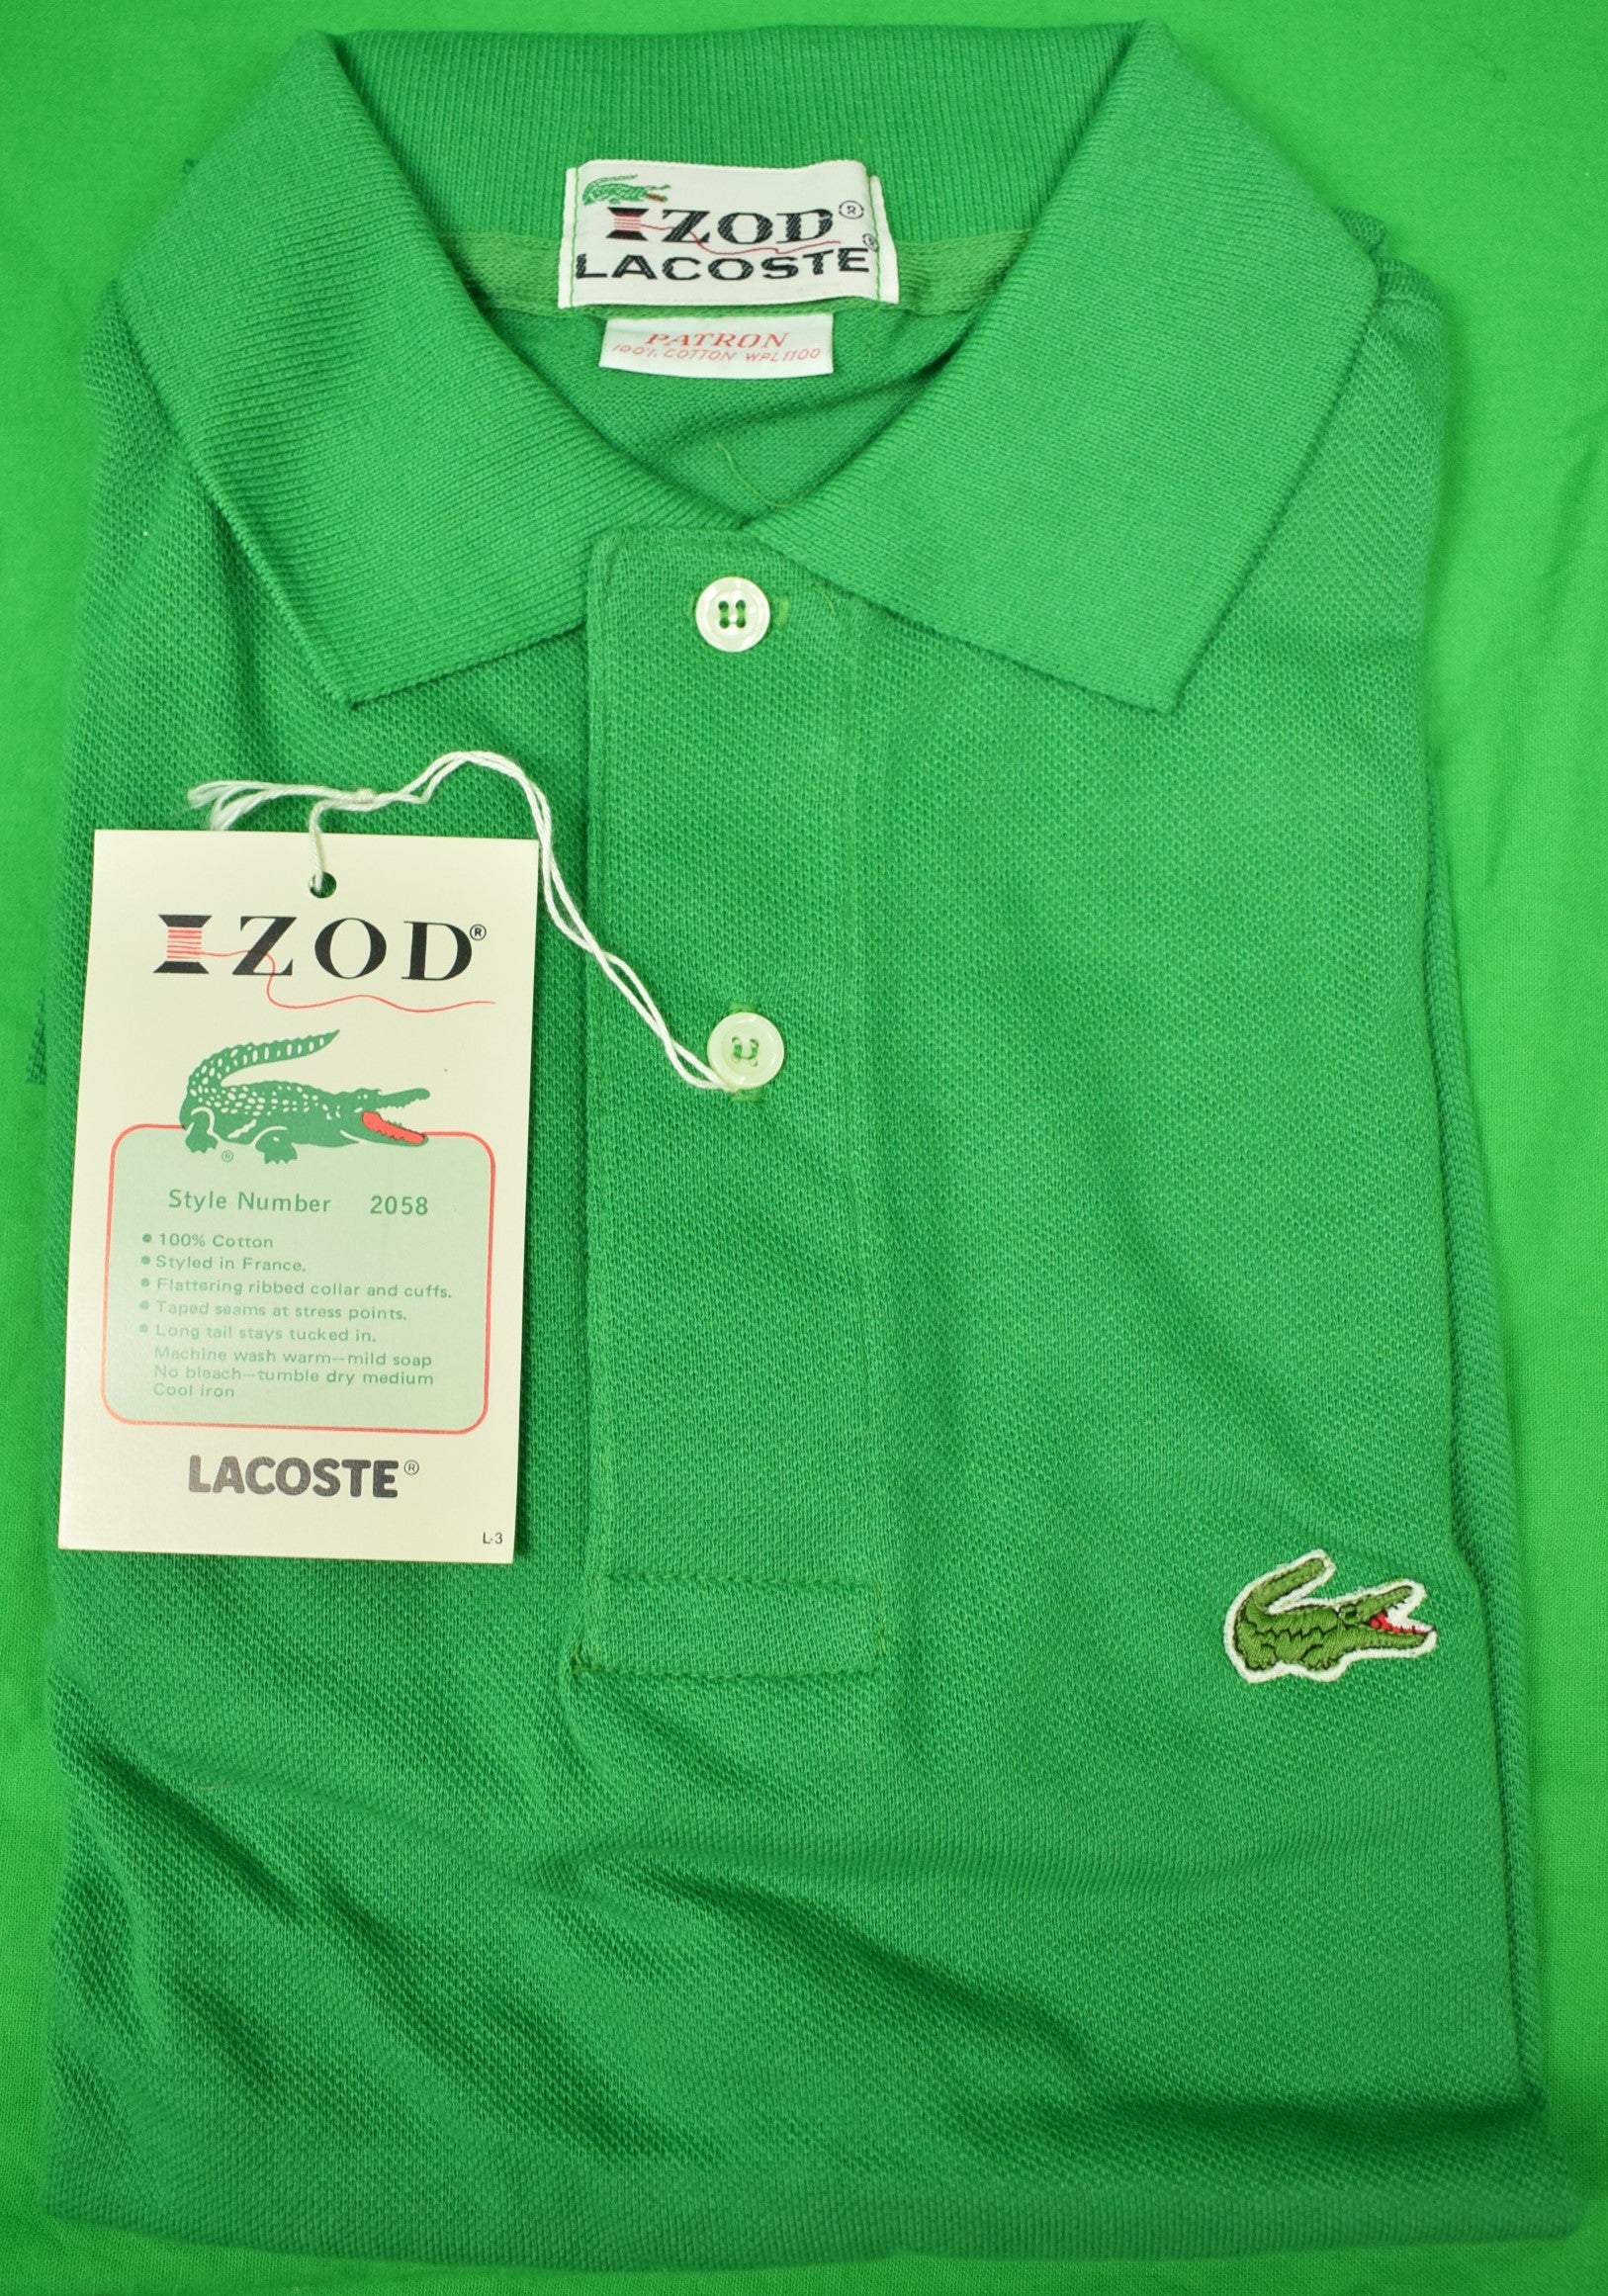 izod and lacoste difference,Save up to 17%,www.ilcascinone.com